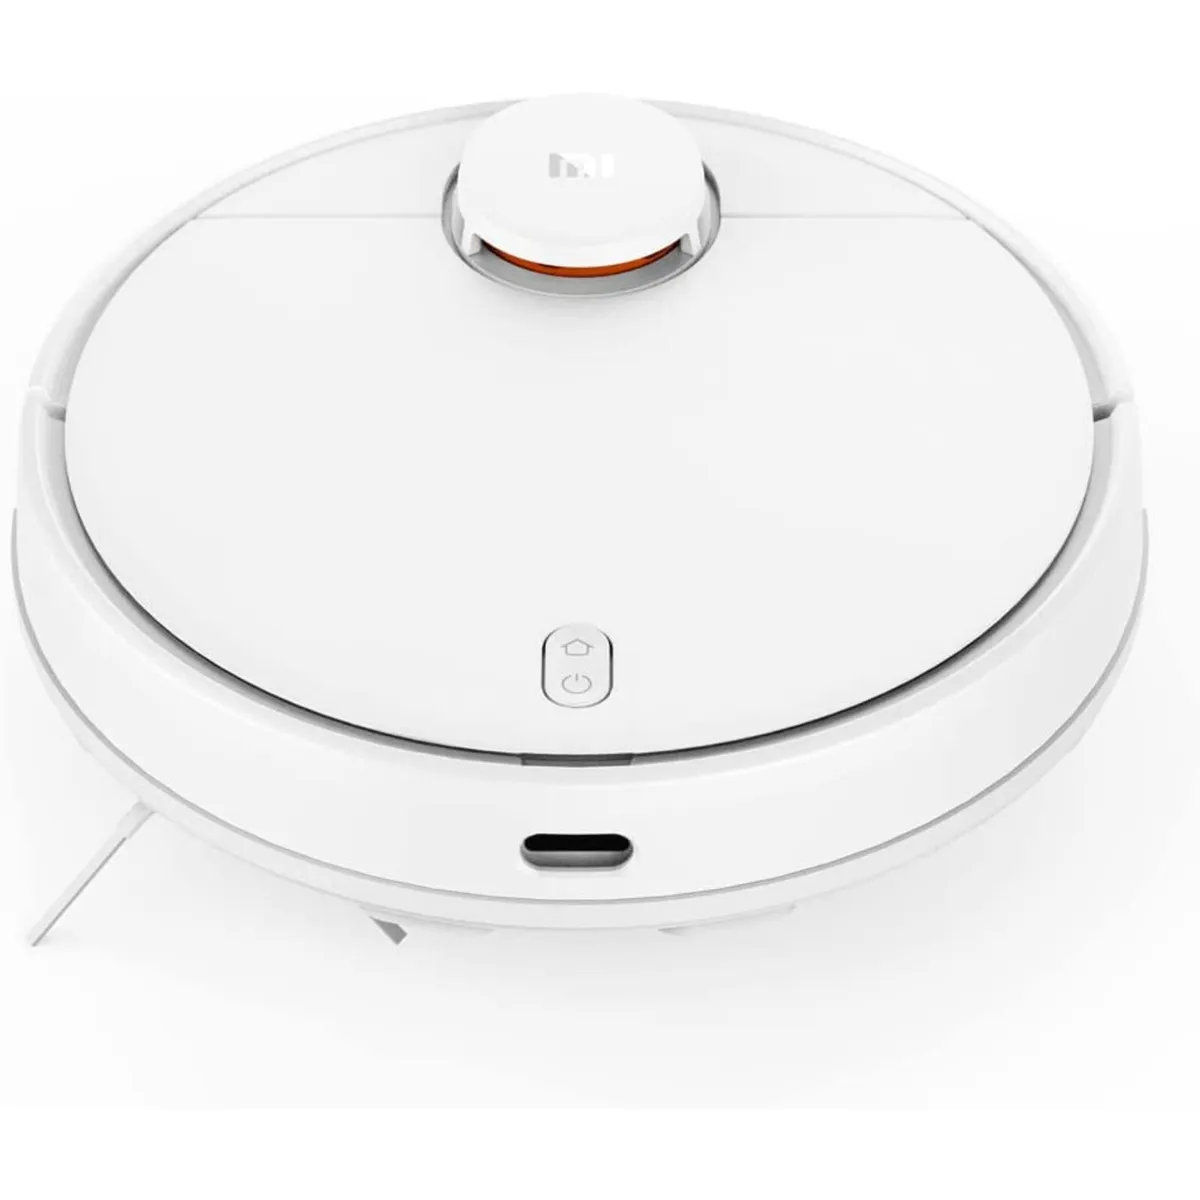 Xiaomi Robot Vacuum Mop 2S Cleaner Sweeper Bagless New Boxed | eBay